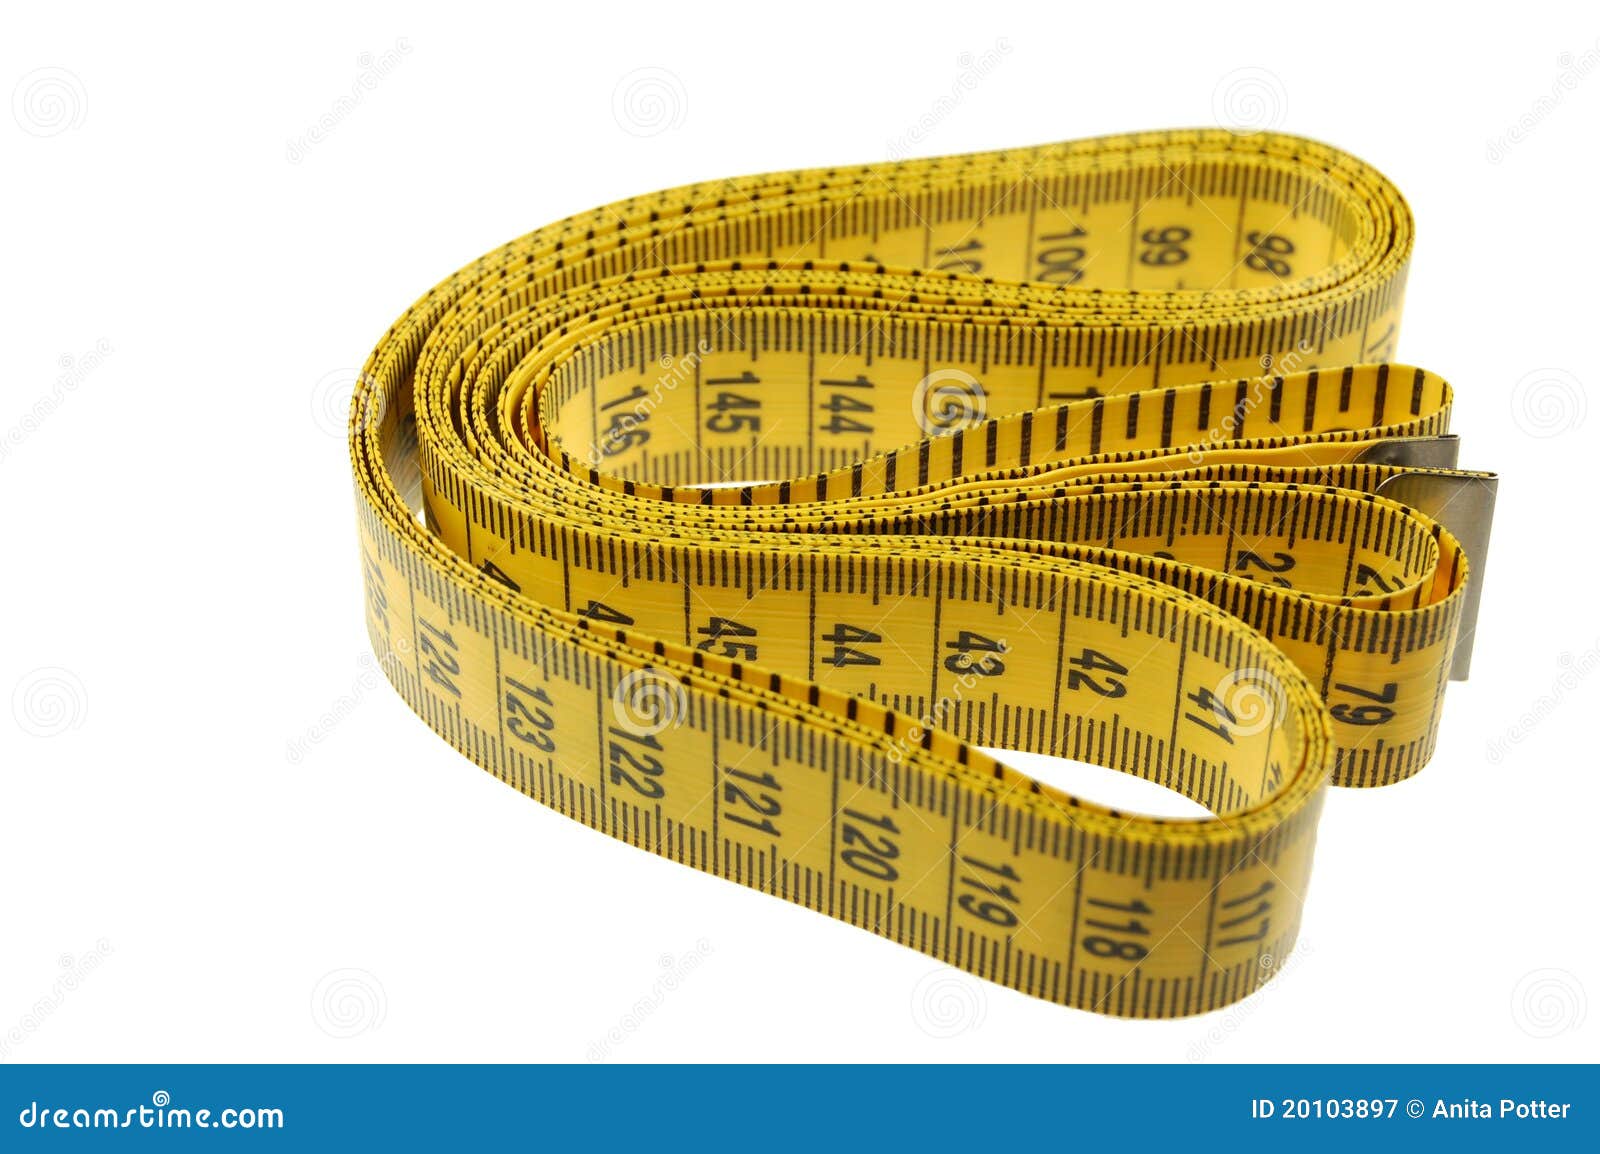 A Seamstress or Tailors Measuring Tape Stock Image - Image of rolled,  measurement: 20103897